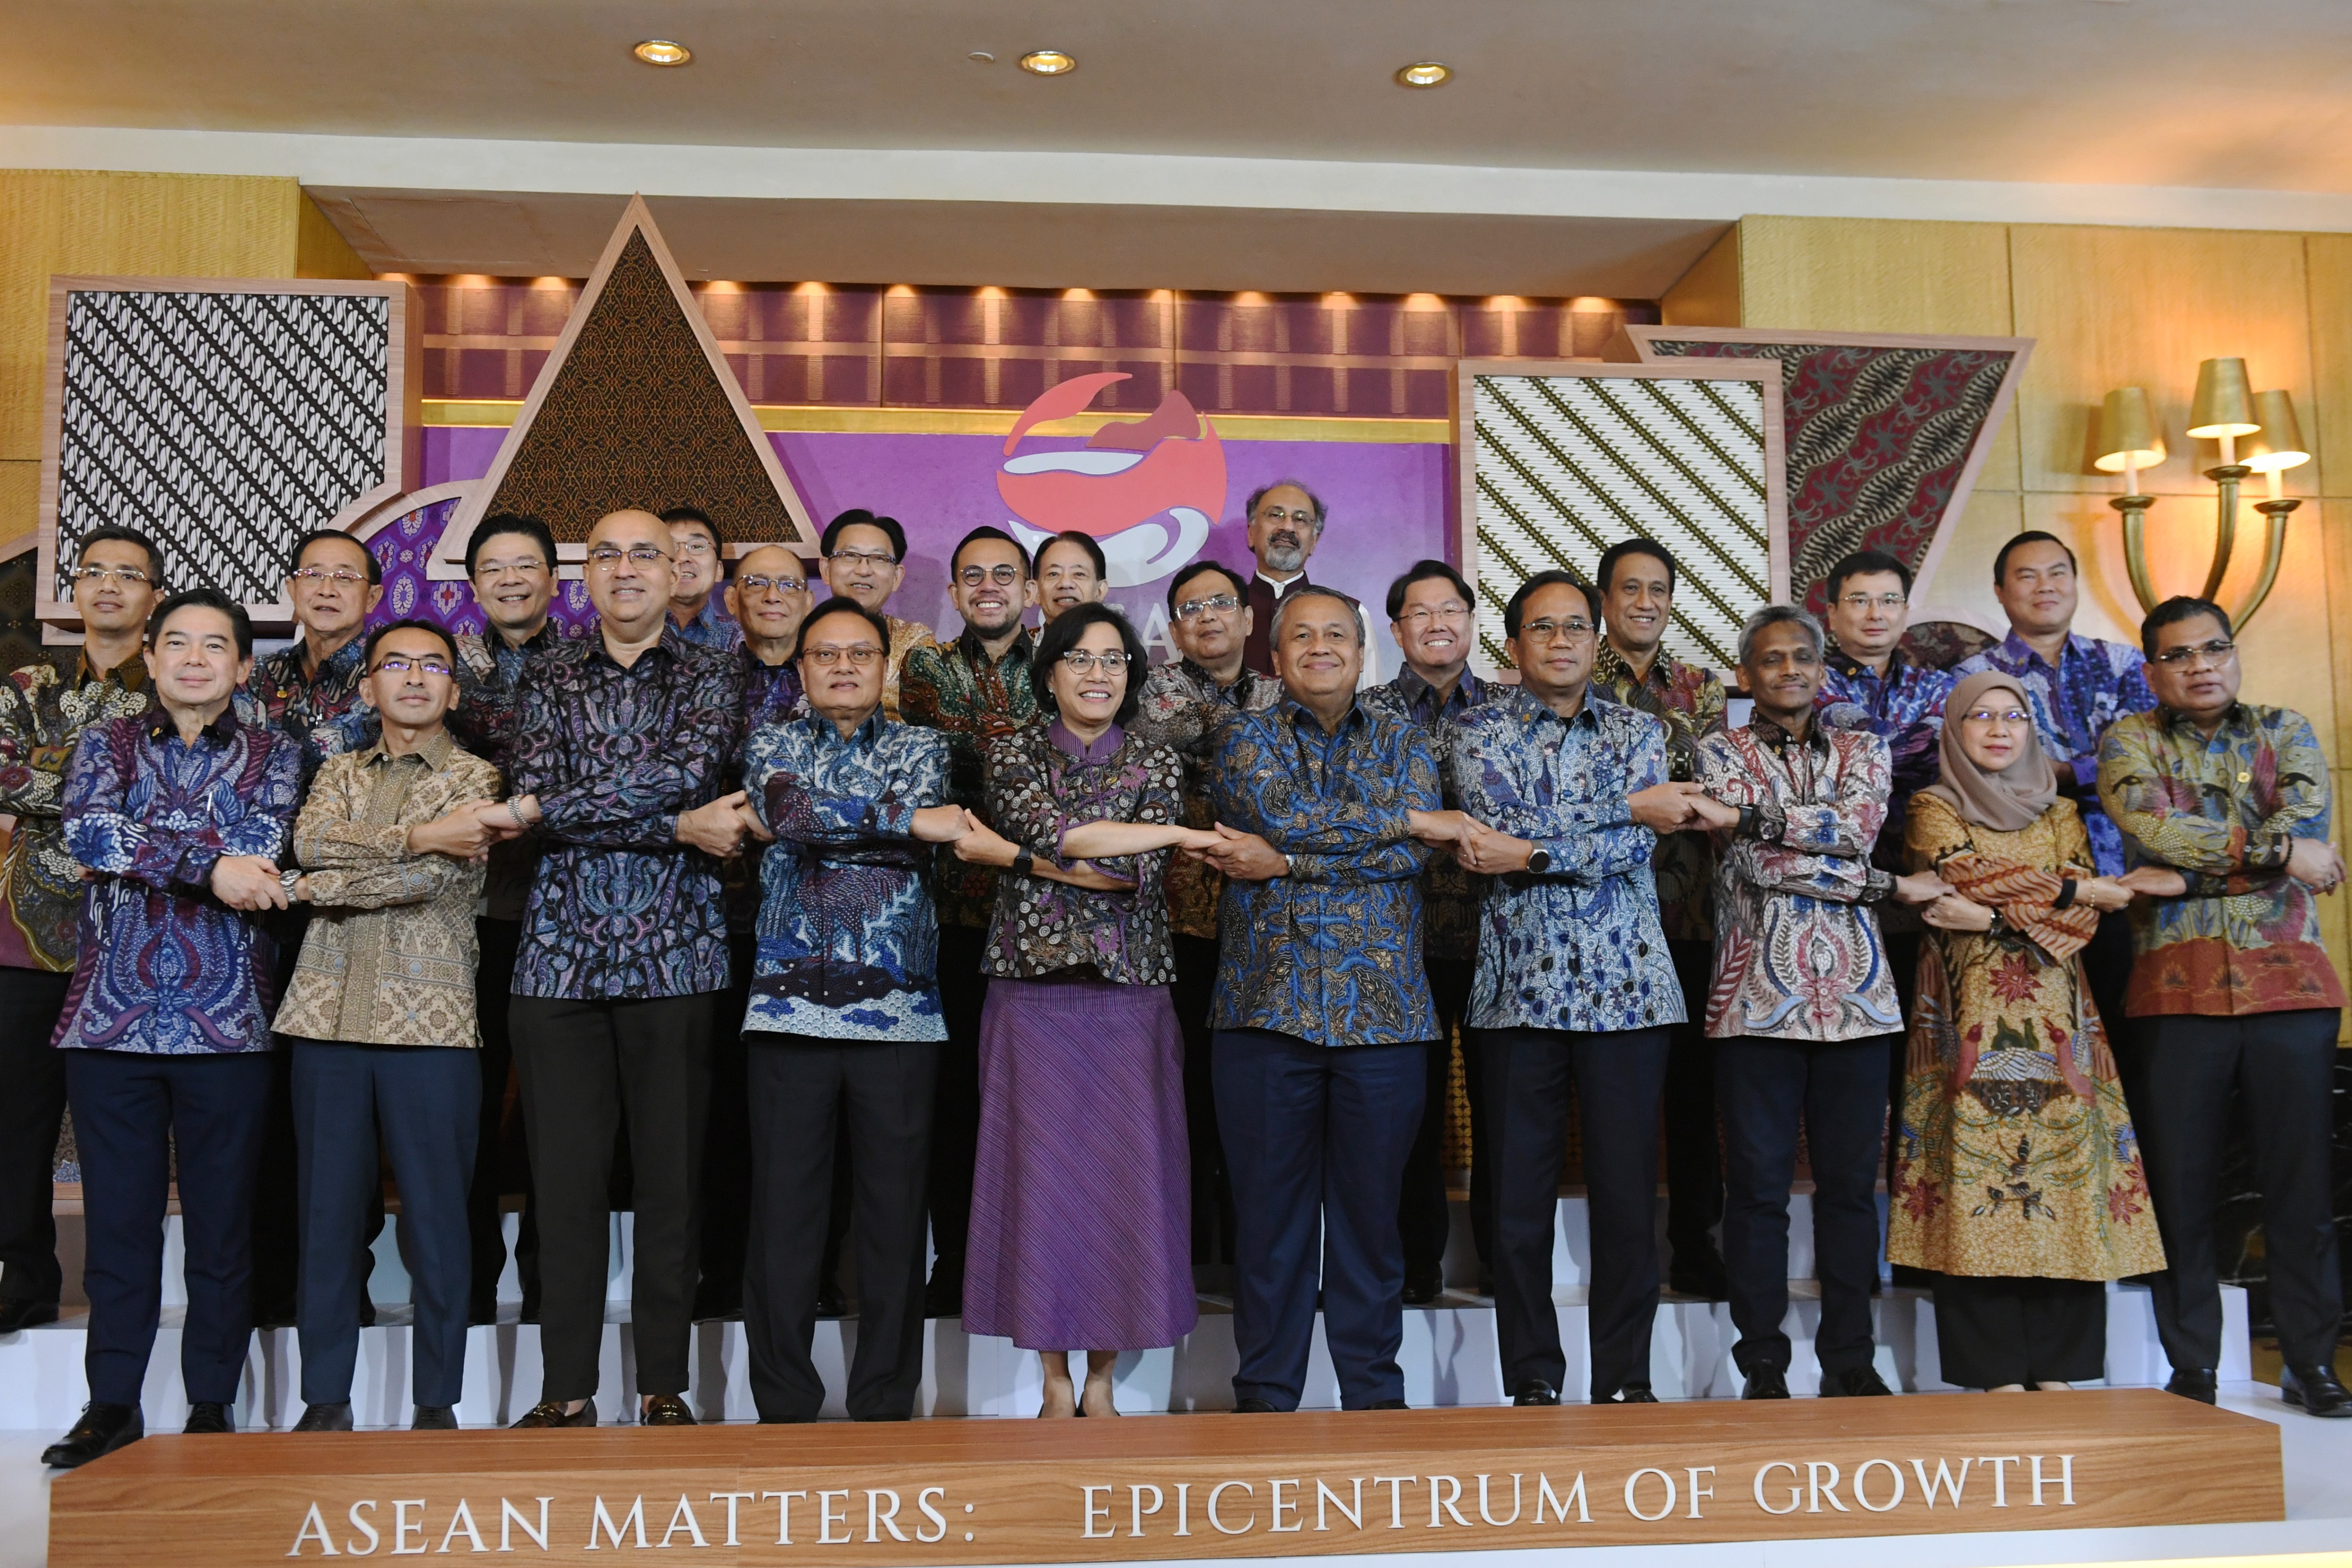 Indonesia's Food Policy in Line with ASEAN’s Commitment